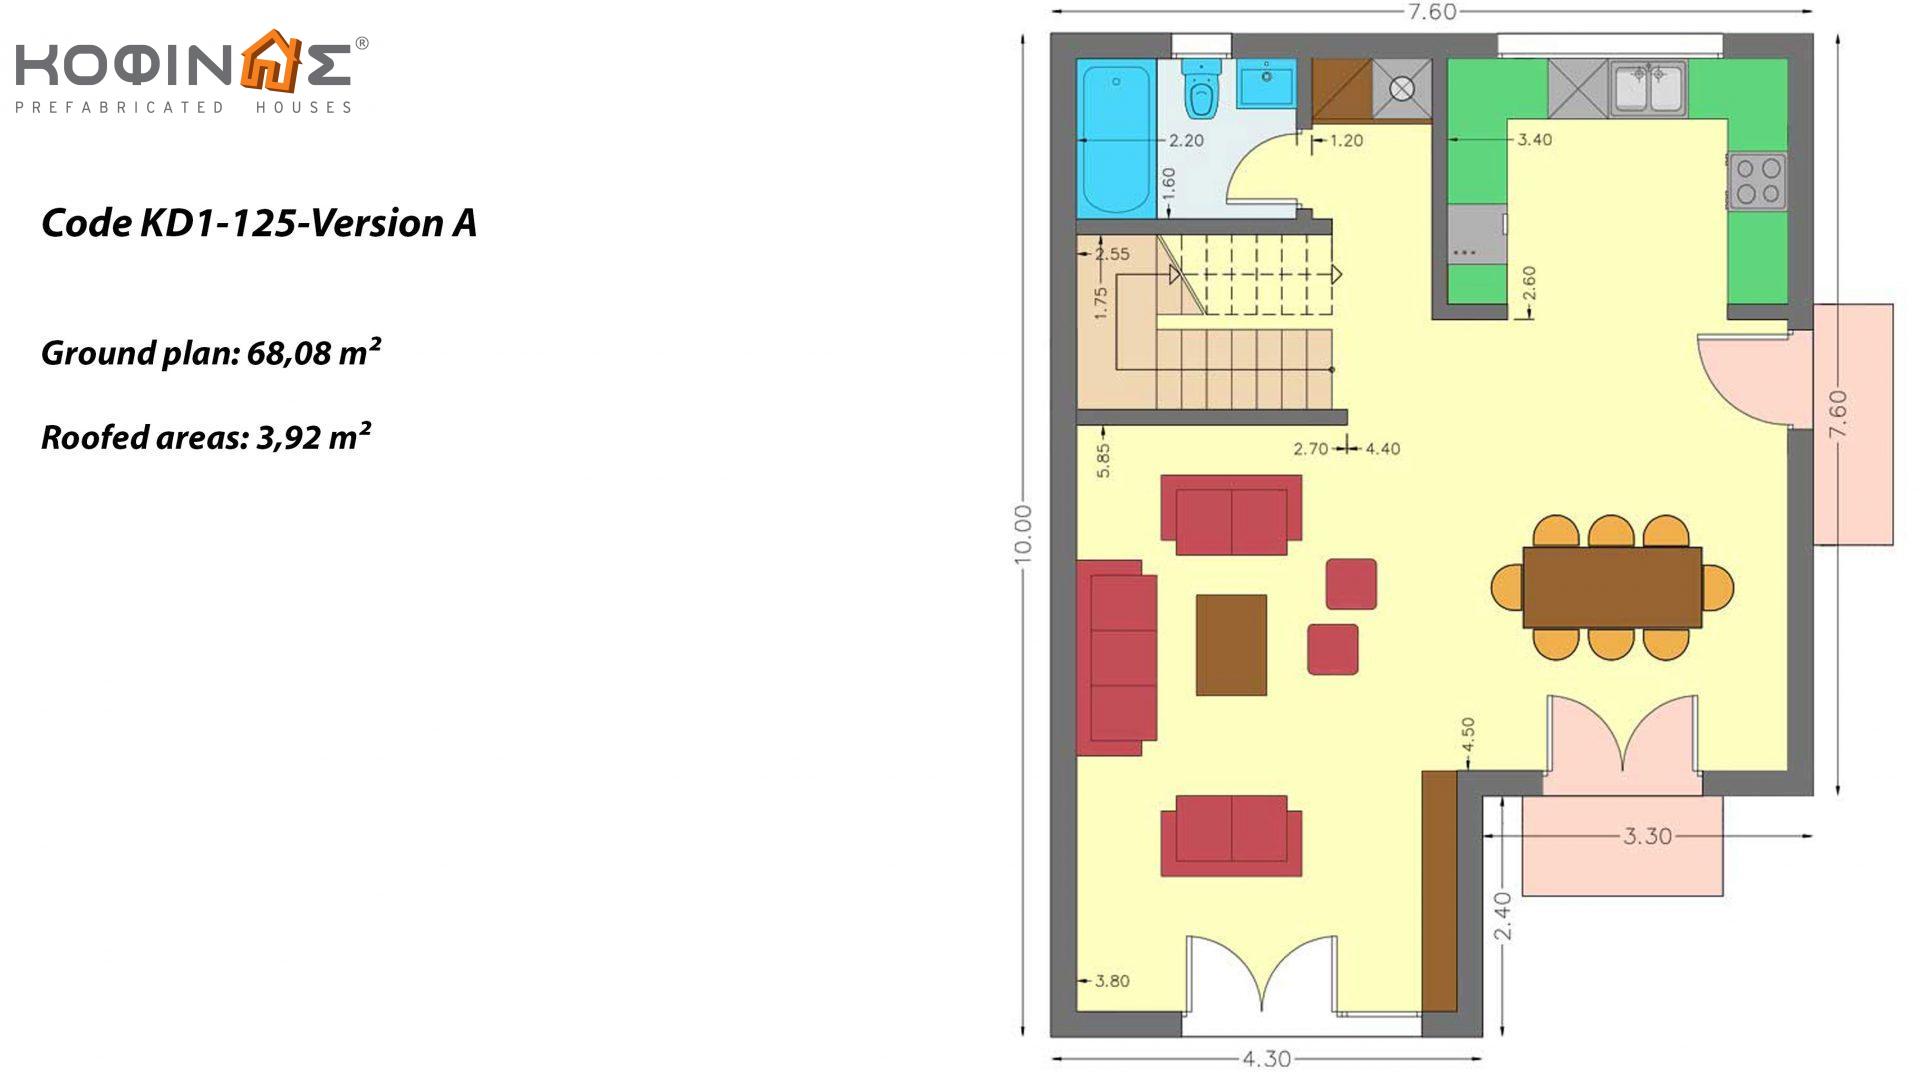 2-story house ΚD1-125, total surface of 125,84 m² ,covered roofed areas 14,22 m²,balconies 10,30 m²